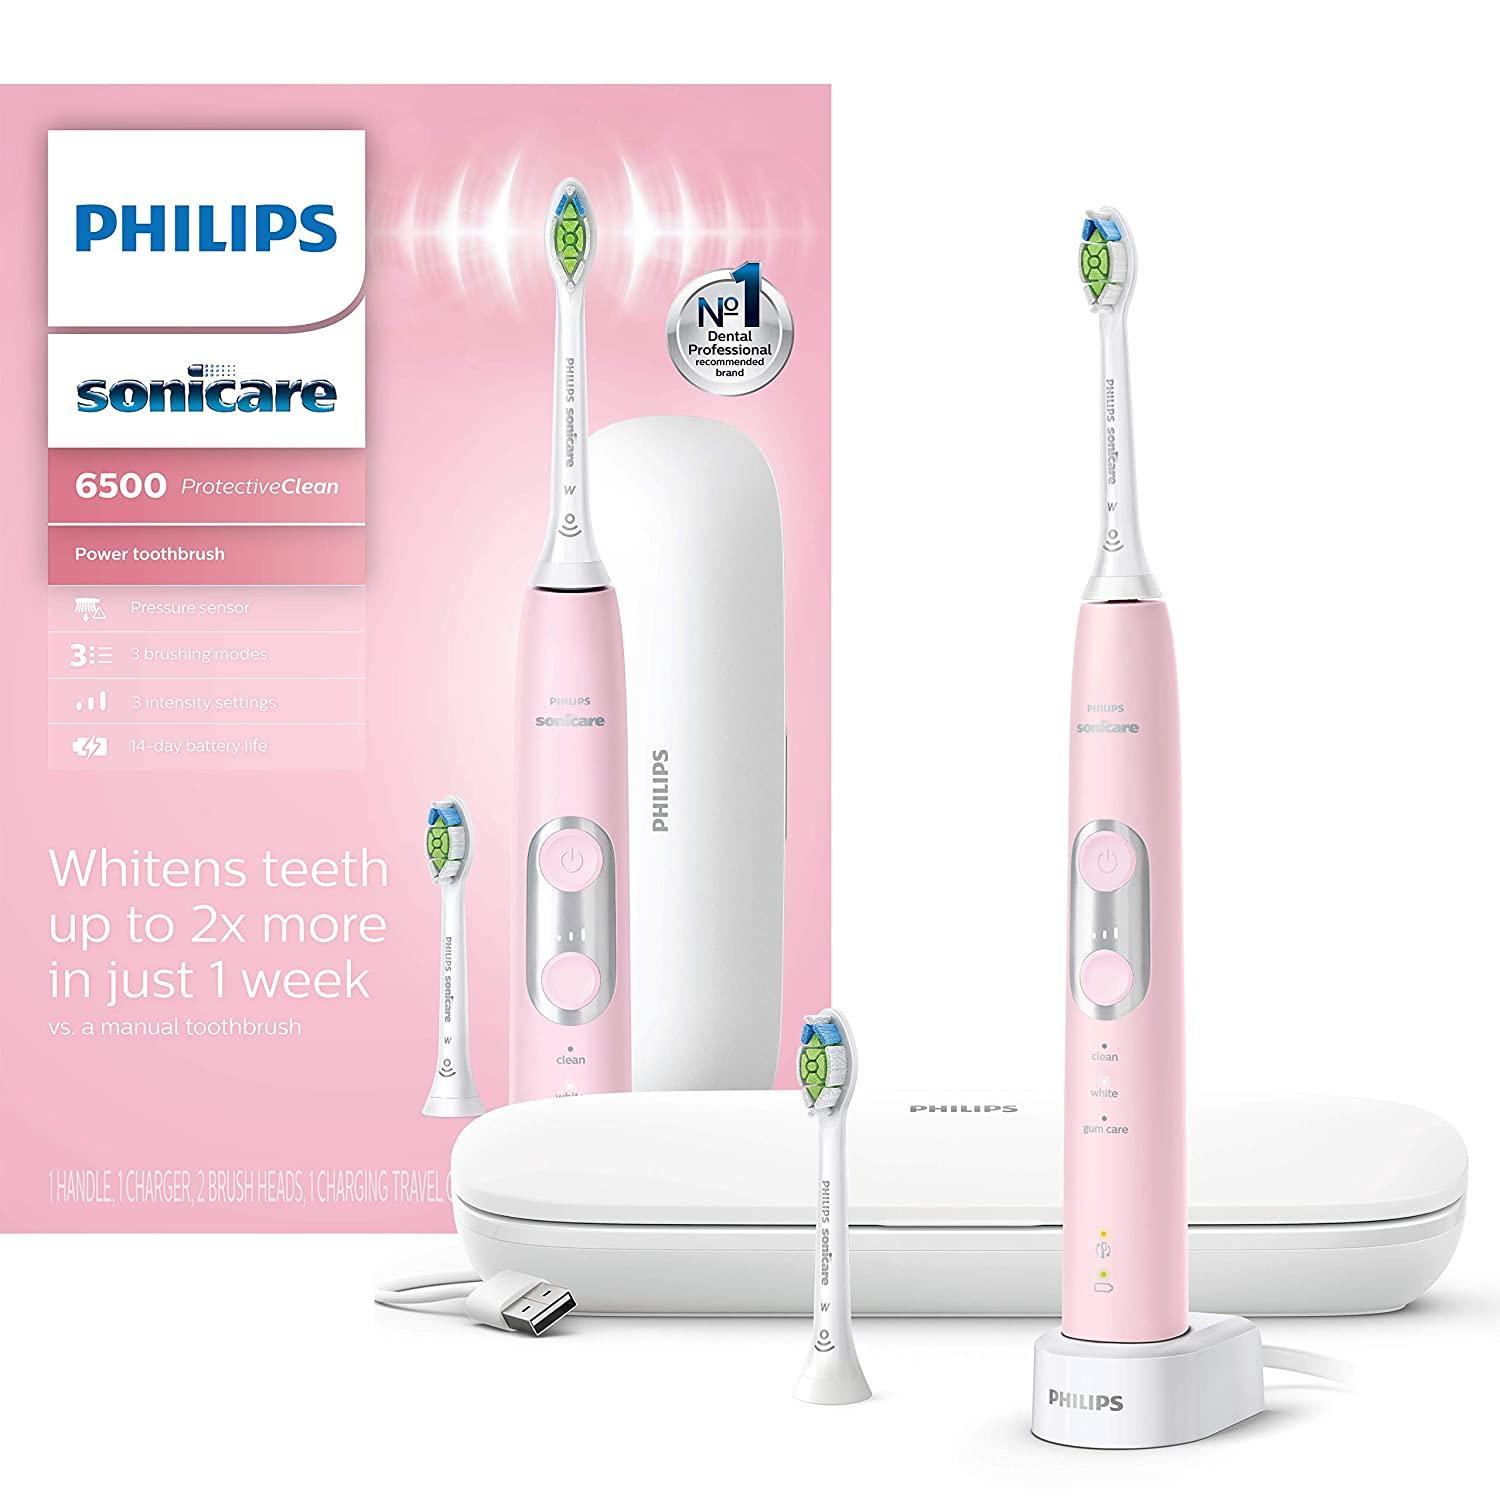 Philips Sonicare 6500 Rechargeable Electric Toothbrush for $89.95 Shipped